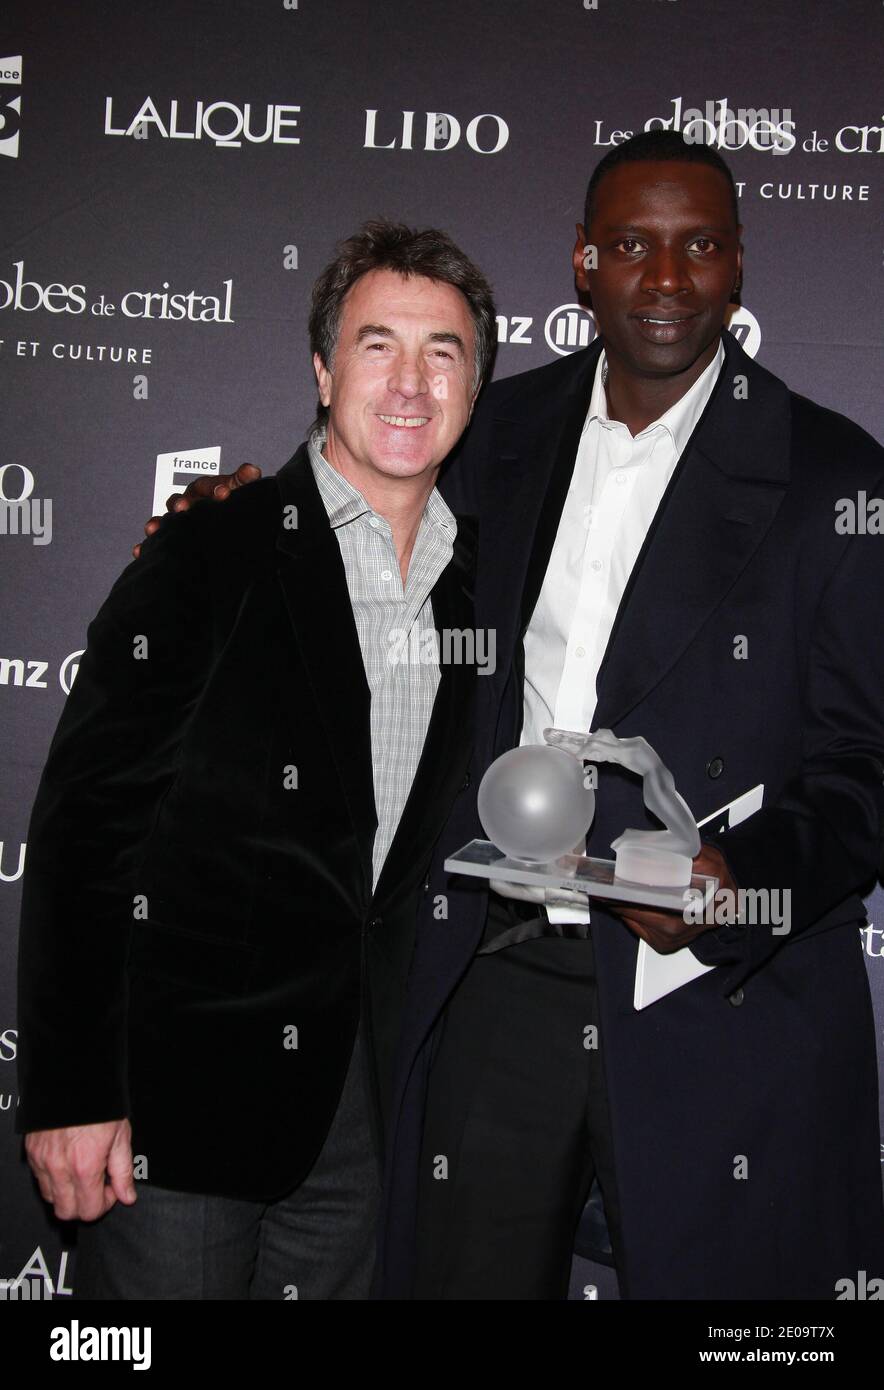 Francois Cluzet and Omar Sy posing in the press room at the 7th 'Globes de Cristal' awards held at the Lido in Paris, France, on February 6, 2012. Photo by Denis Guignebourg/ABACAPRESS.COM Stock Photo